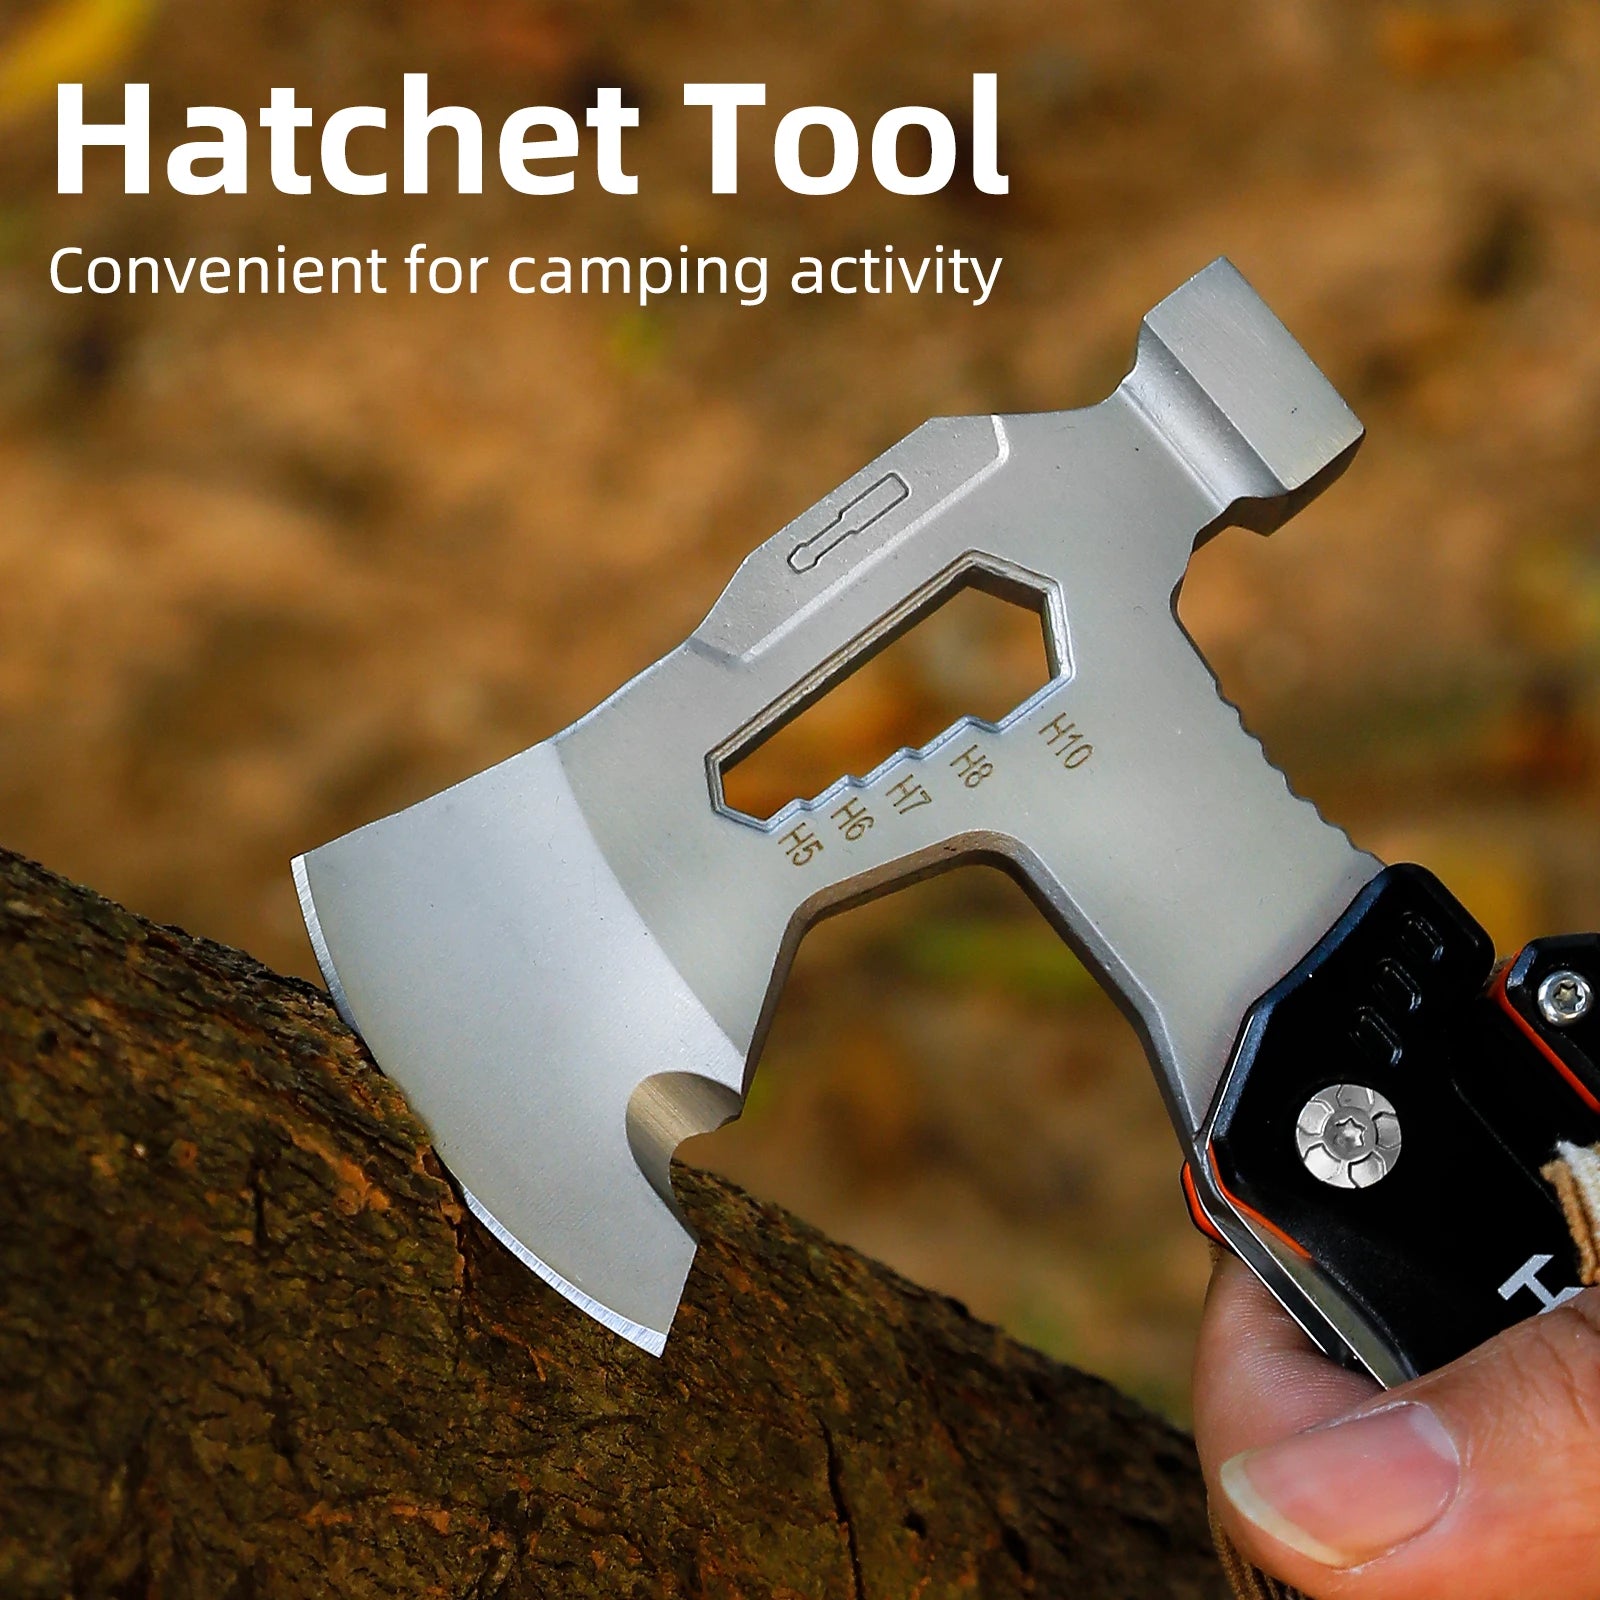 HANSHI 17 in 1 Pocket Multitool Axe with Sheath YG10 Replaceable Wire Cutter Multi Function Tool with Plier Hatchet Hammer Knife